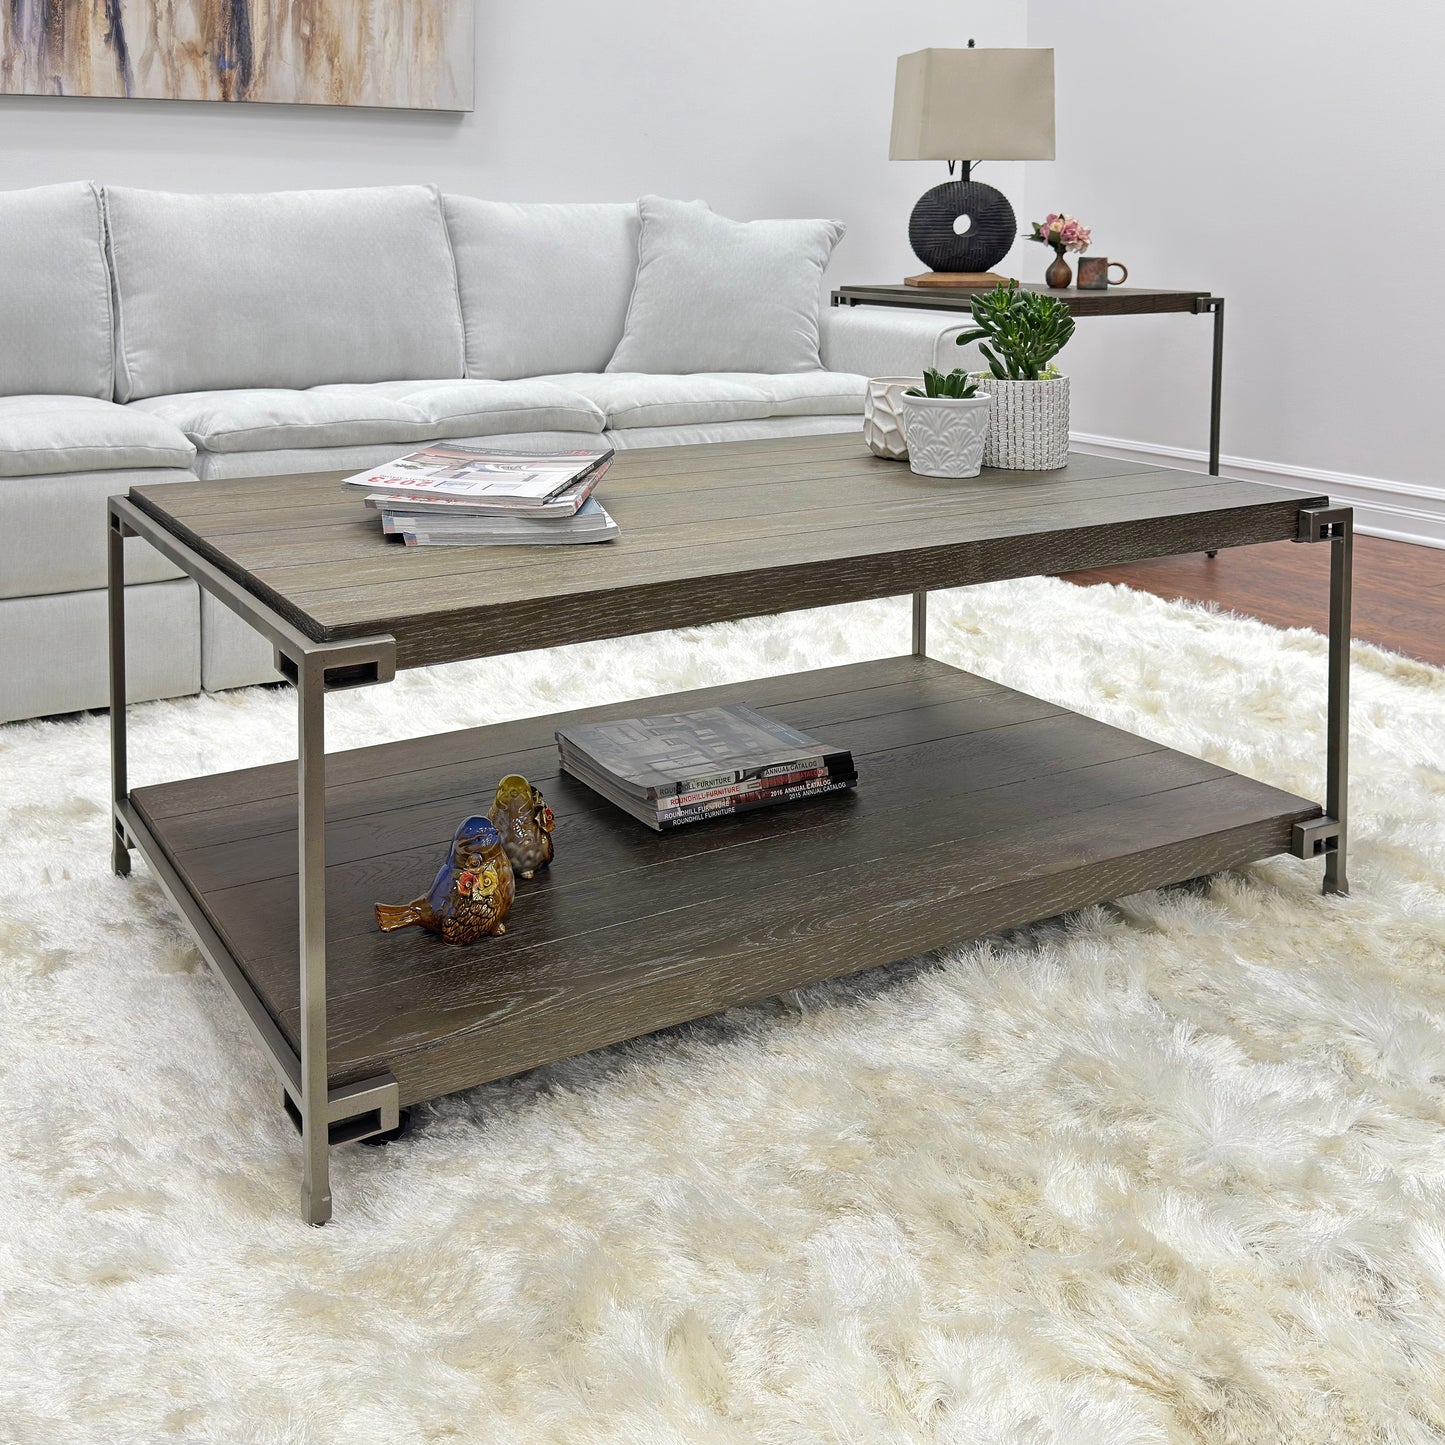 Roundhill Furniture Corbeta Metal Frame Wood Living Room Coffee Table with Casters